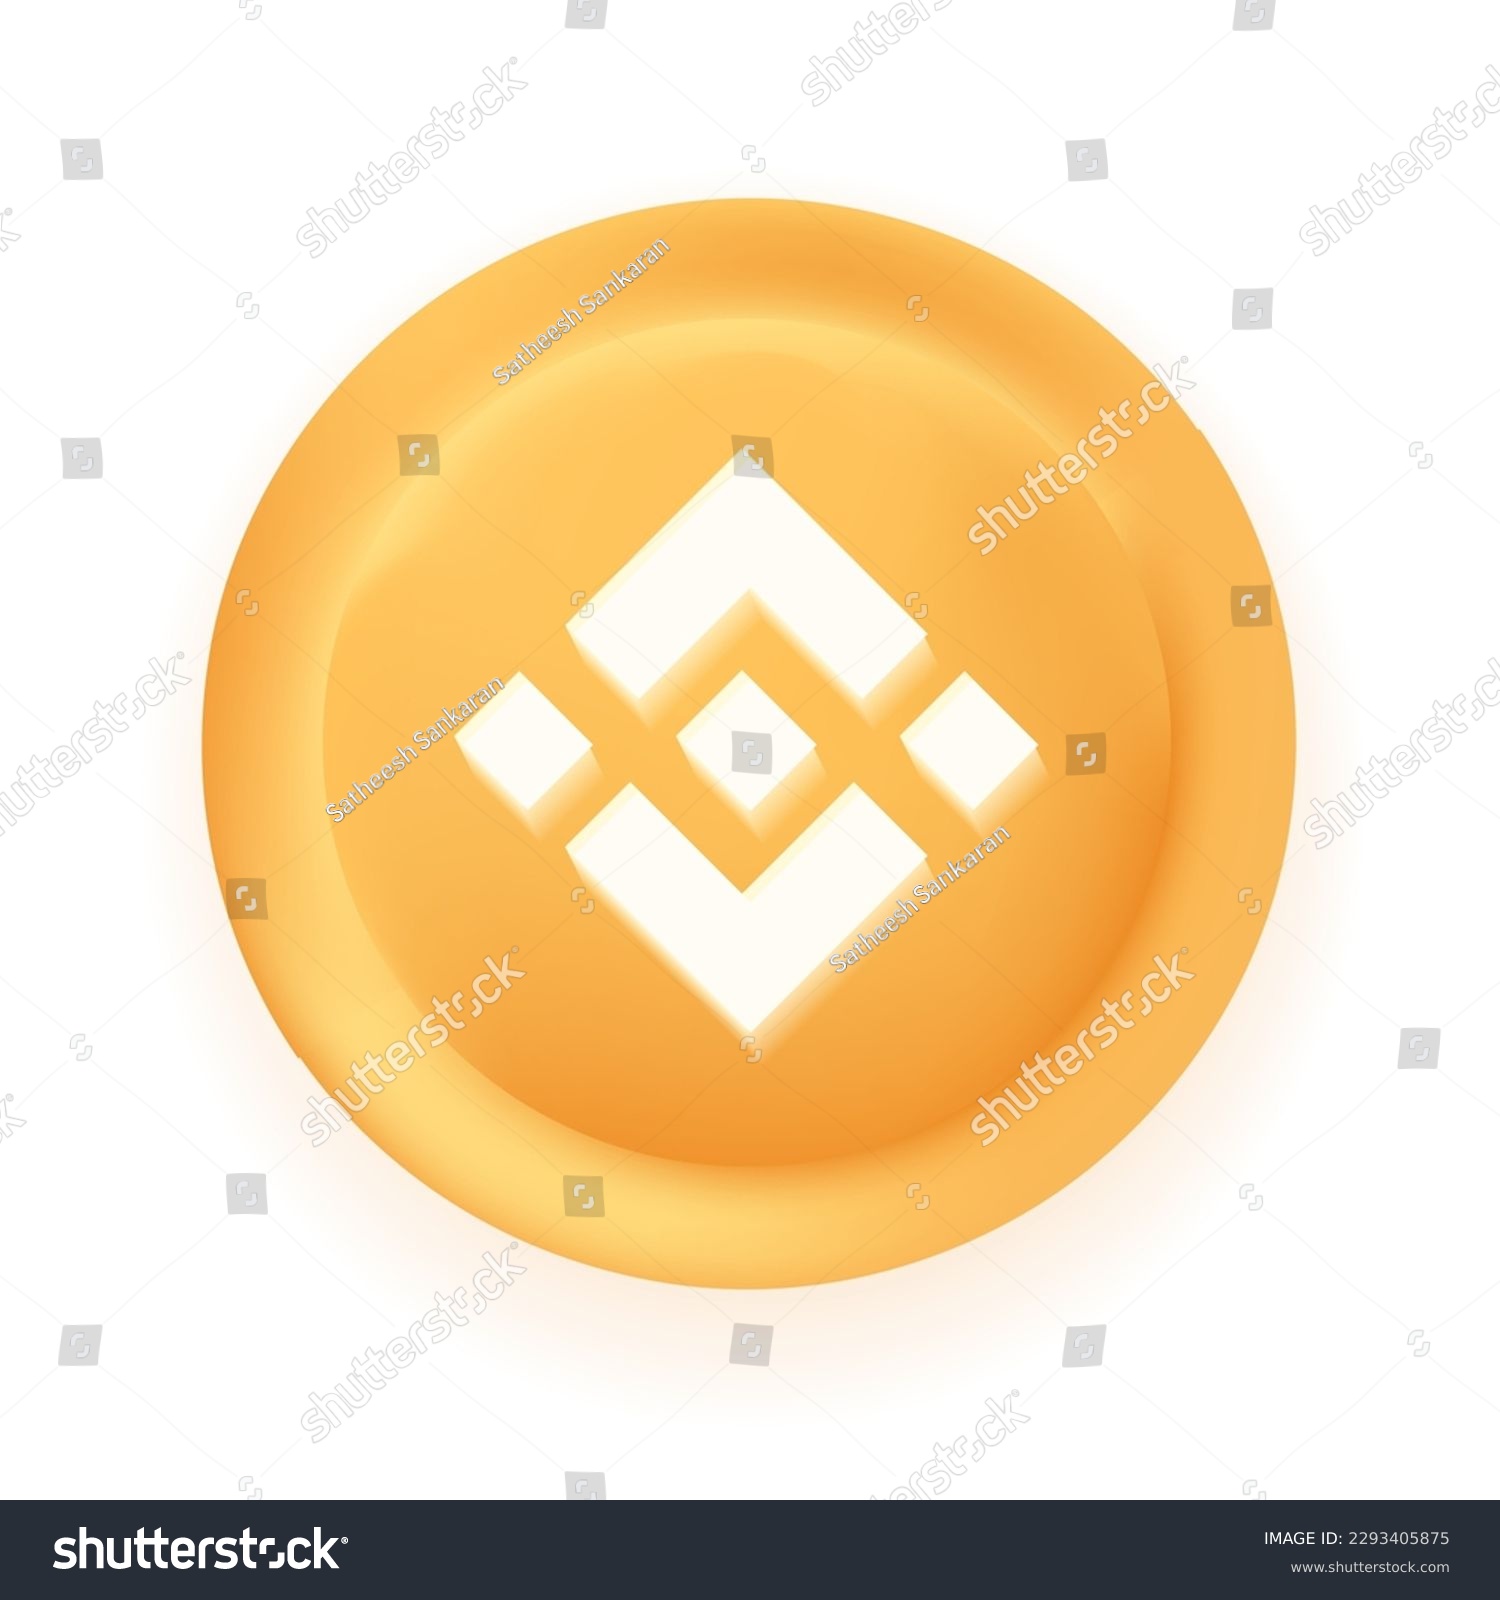 SVG of Binance BNB crypto currency 3D coin vector illustration isolated on white background. Can be used as virtual money icon, logo, emblem, sticker and badge designs. svg